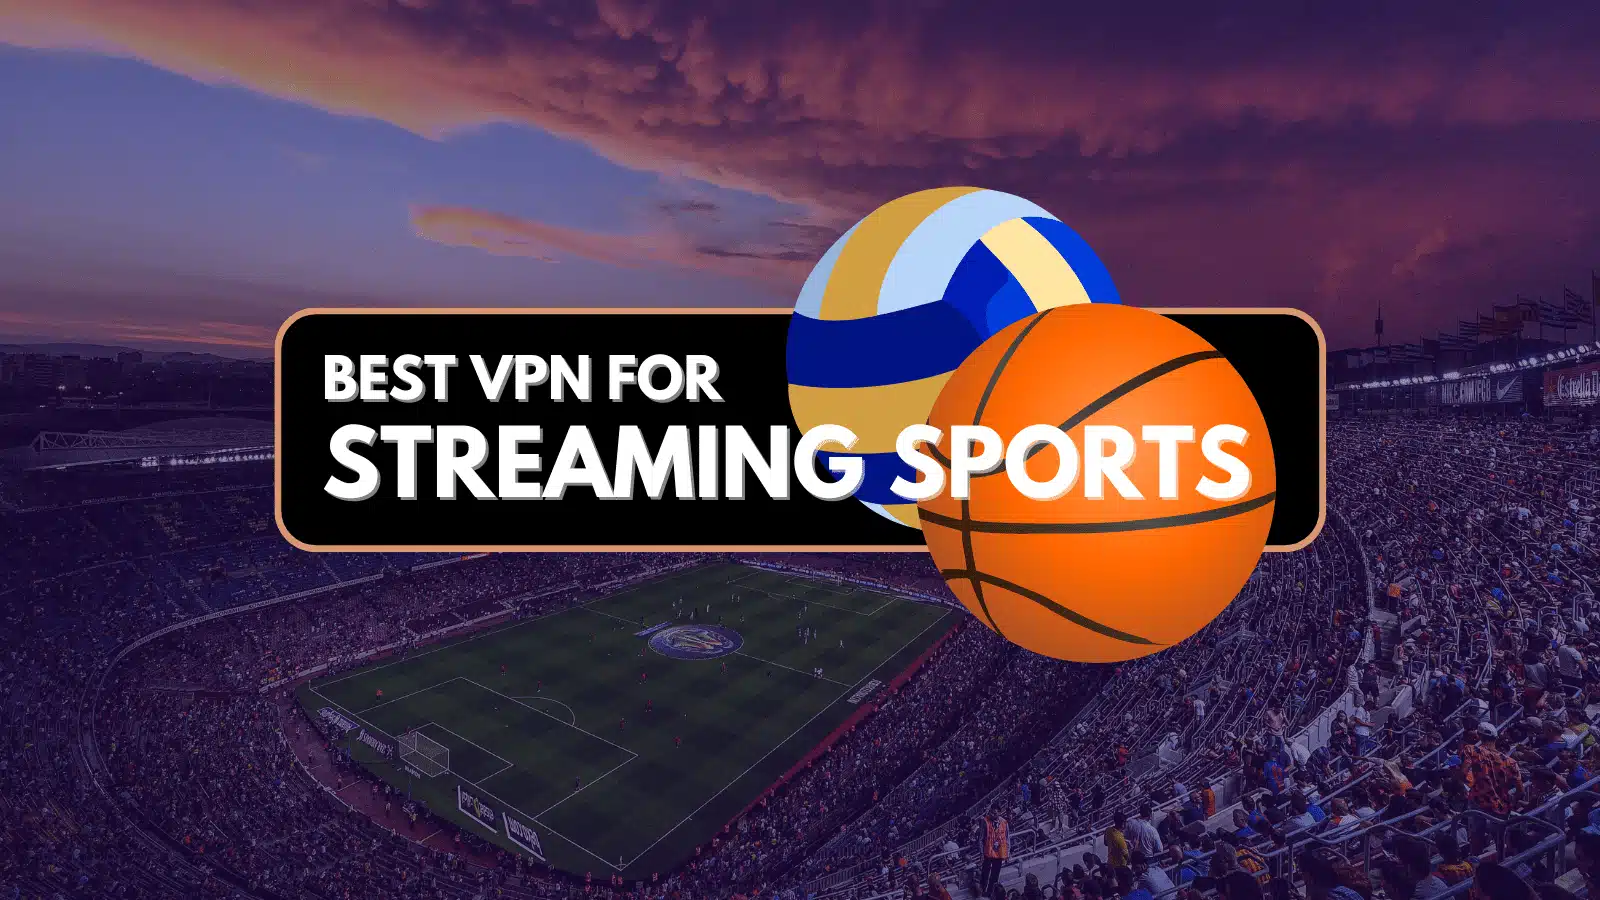 NBA can be streamed through VPN in other parts of the world